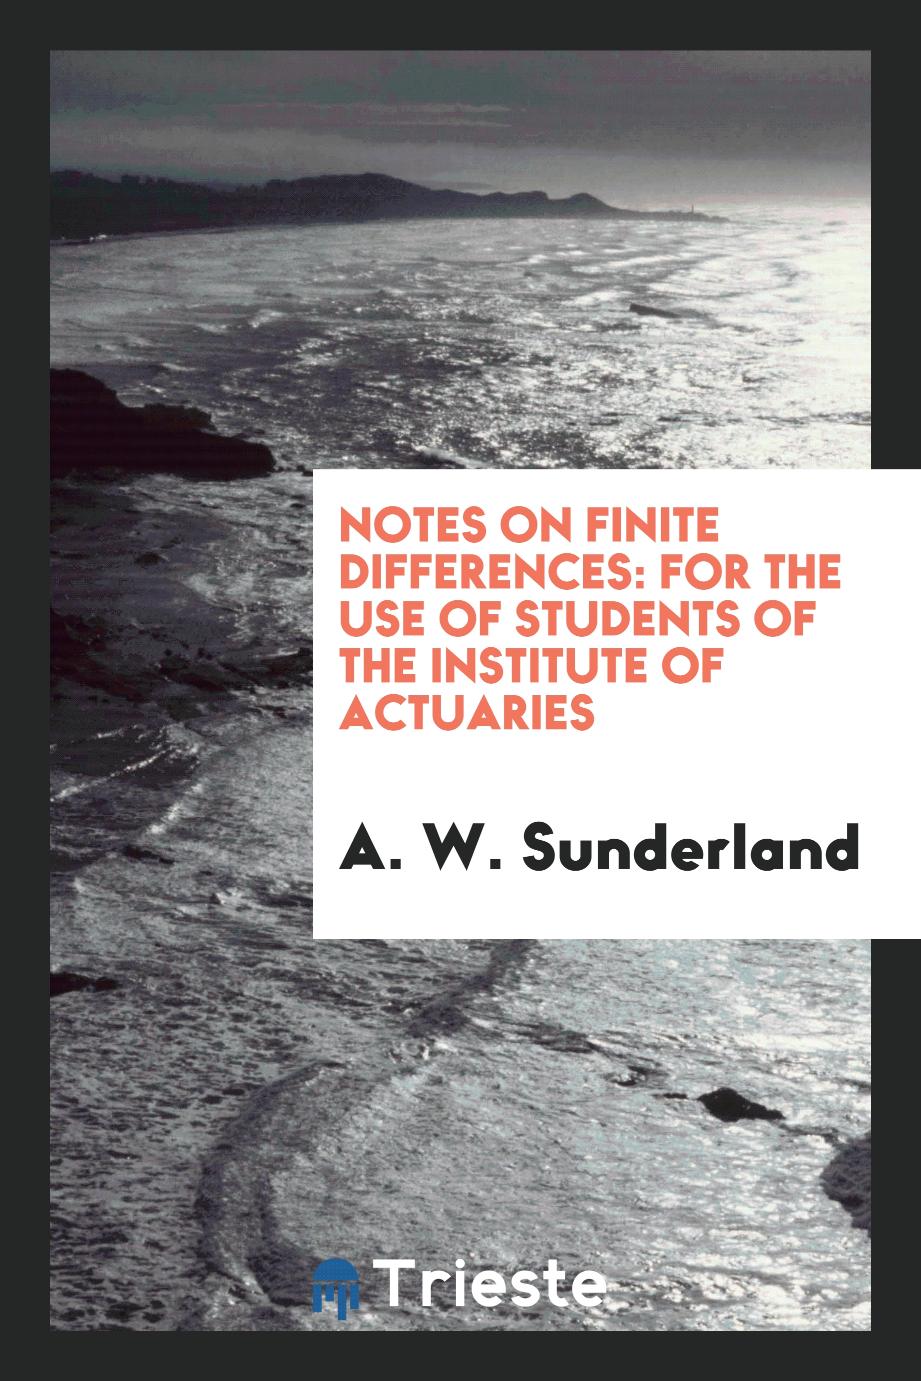 Notes on finite differences: For the Use of Students of the Institute of Actuaries